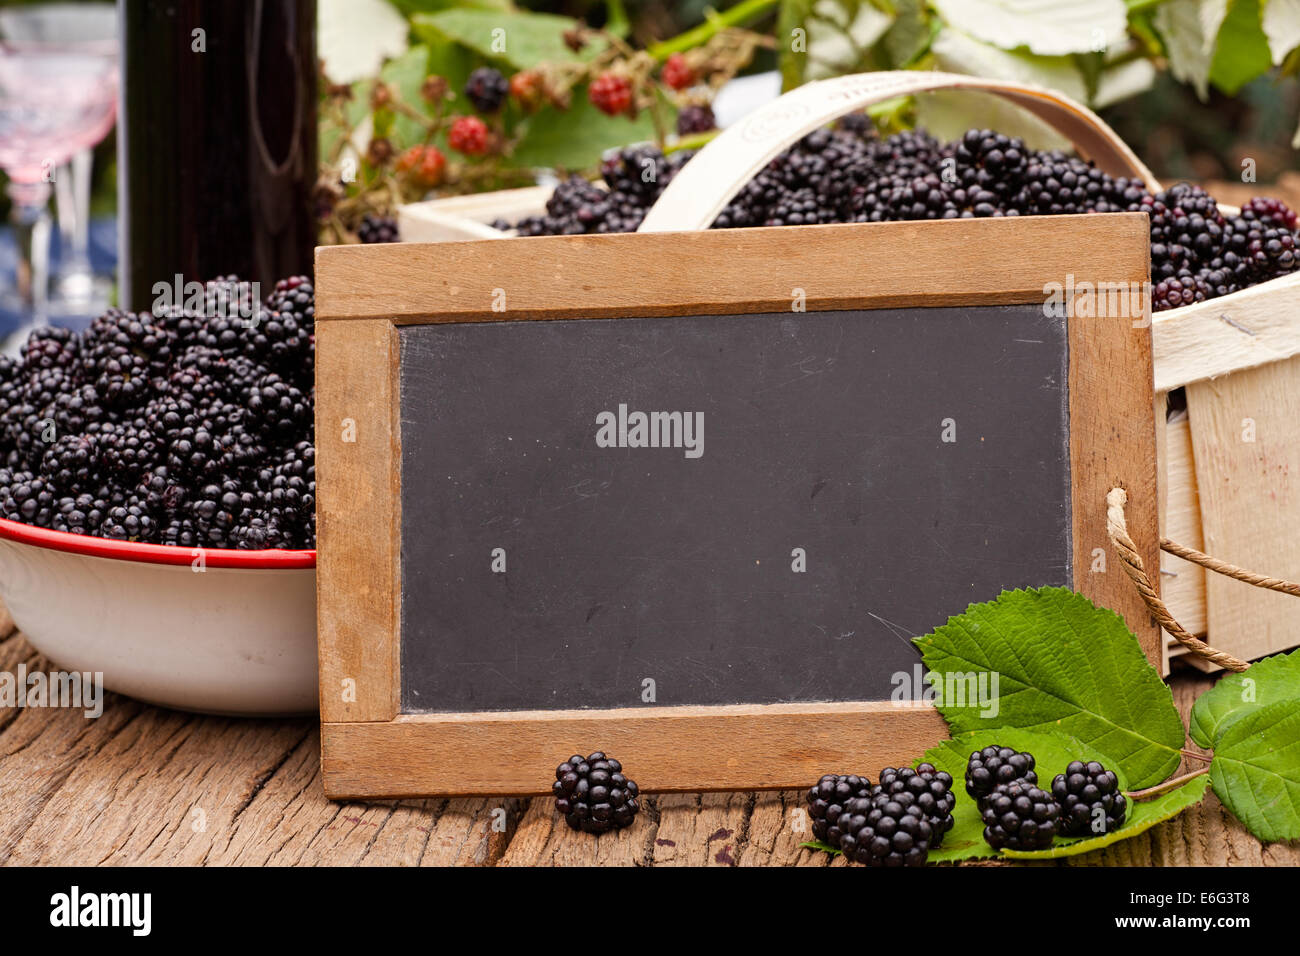 Blank advertising space on a slate blackboard in front of ripe blackberries on a rustic wooden table Stock Photo